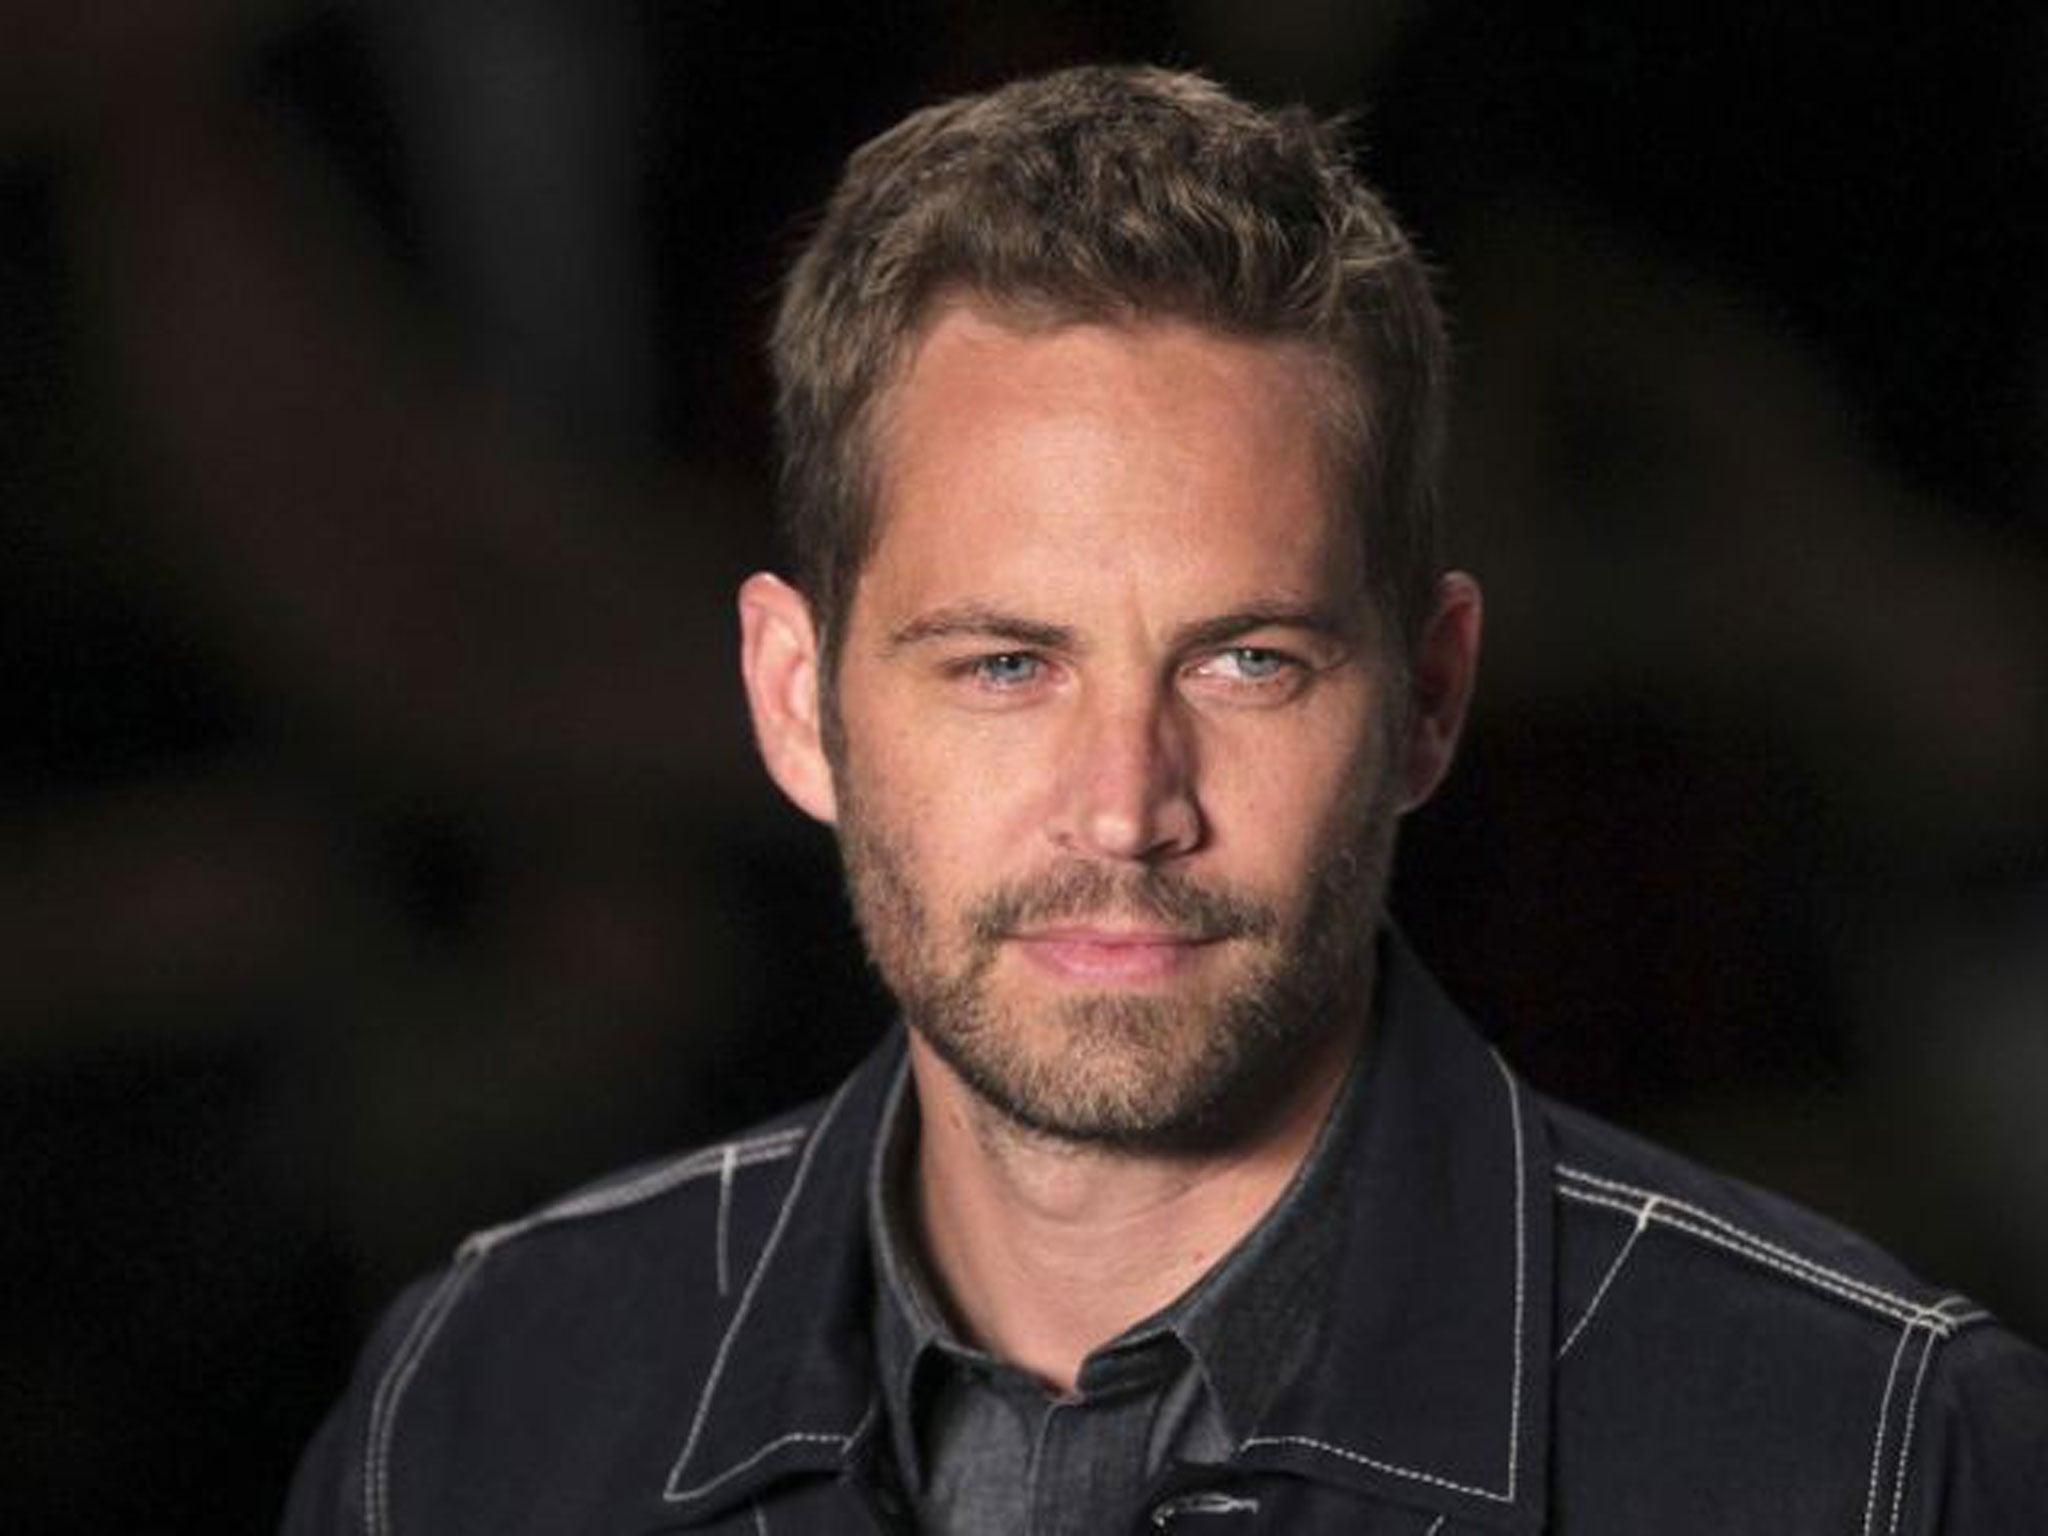 Profile Paul Walker, star of the Fast & Furious movie series, who has